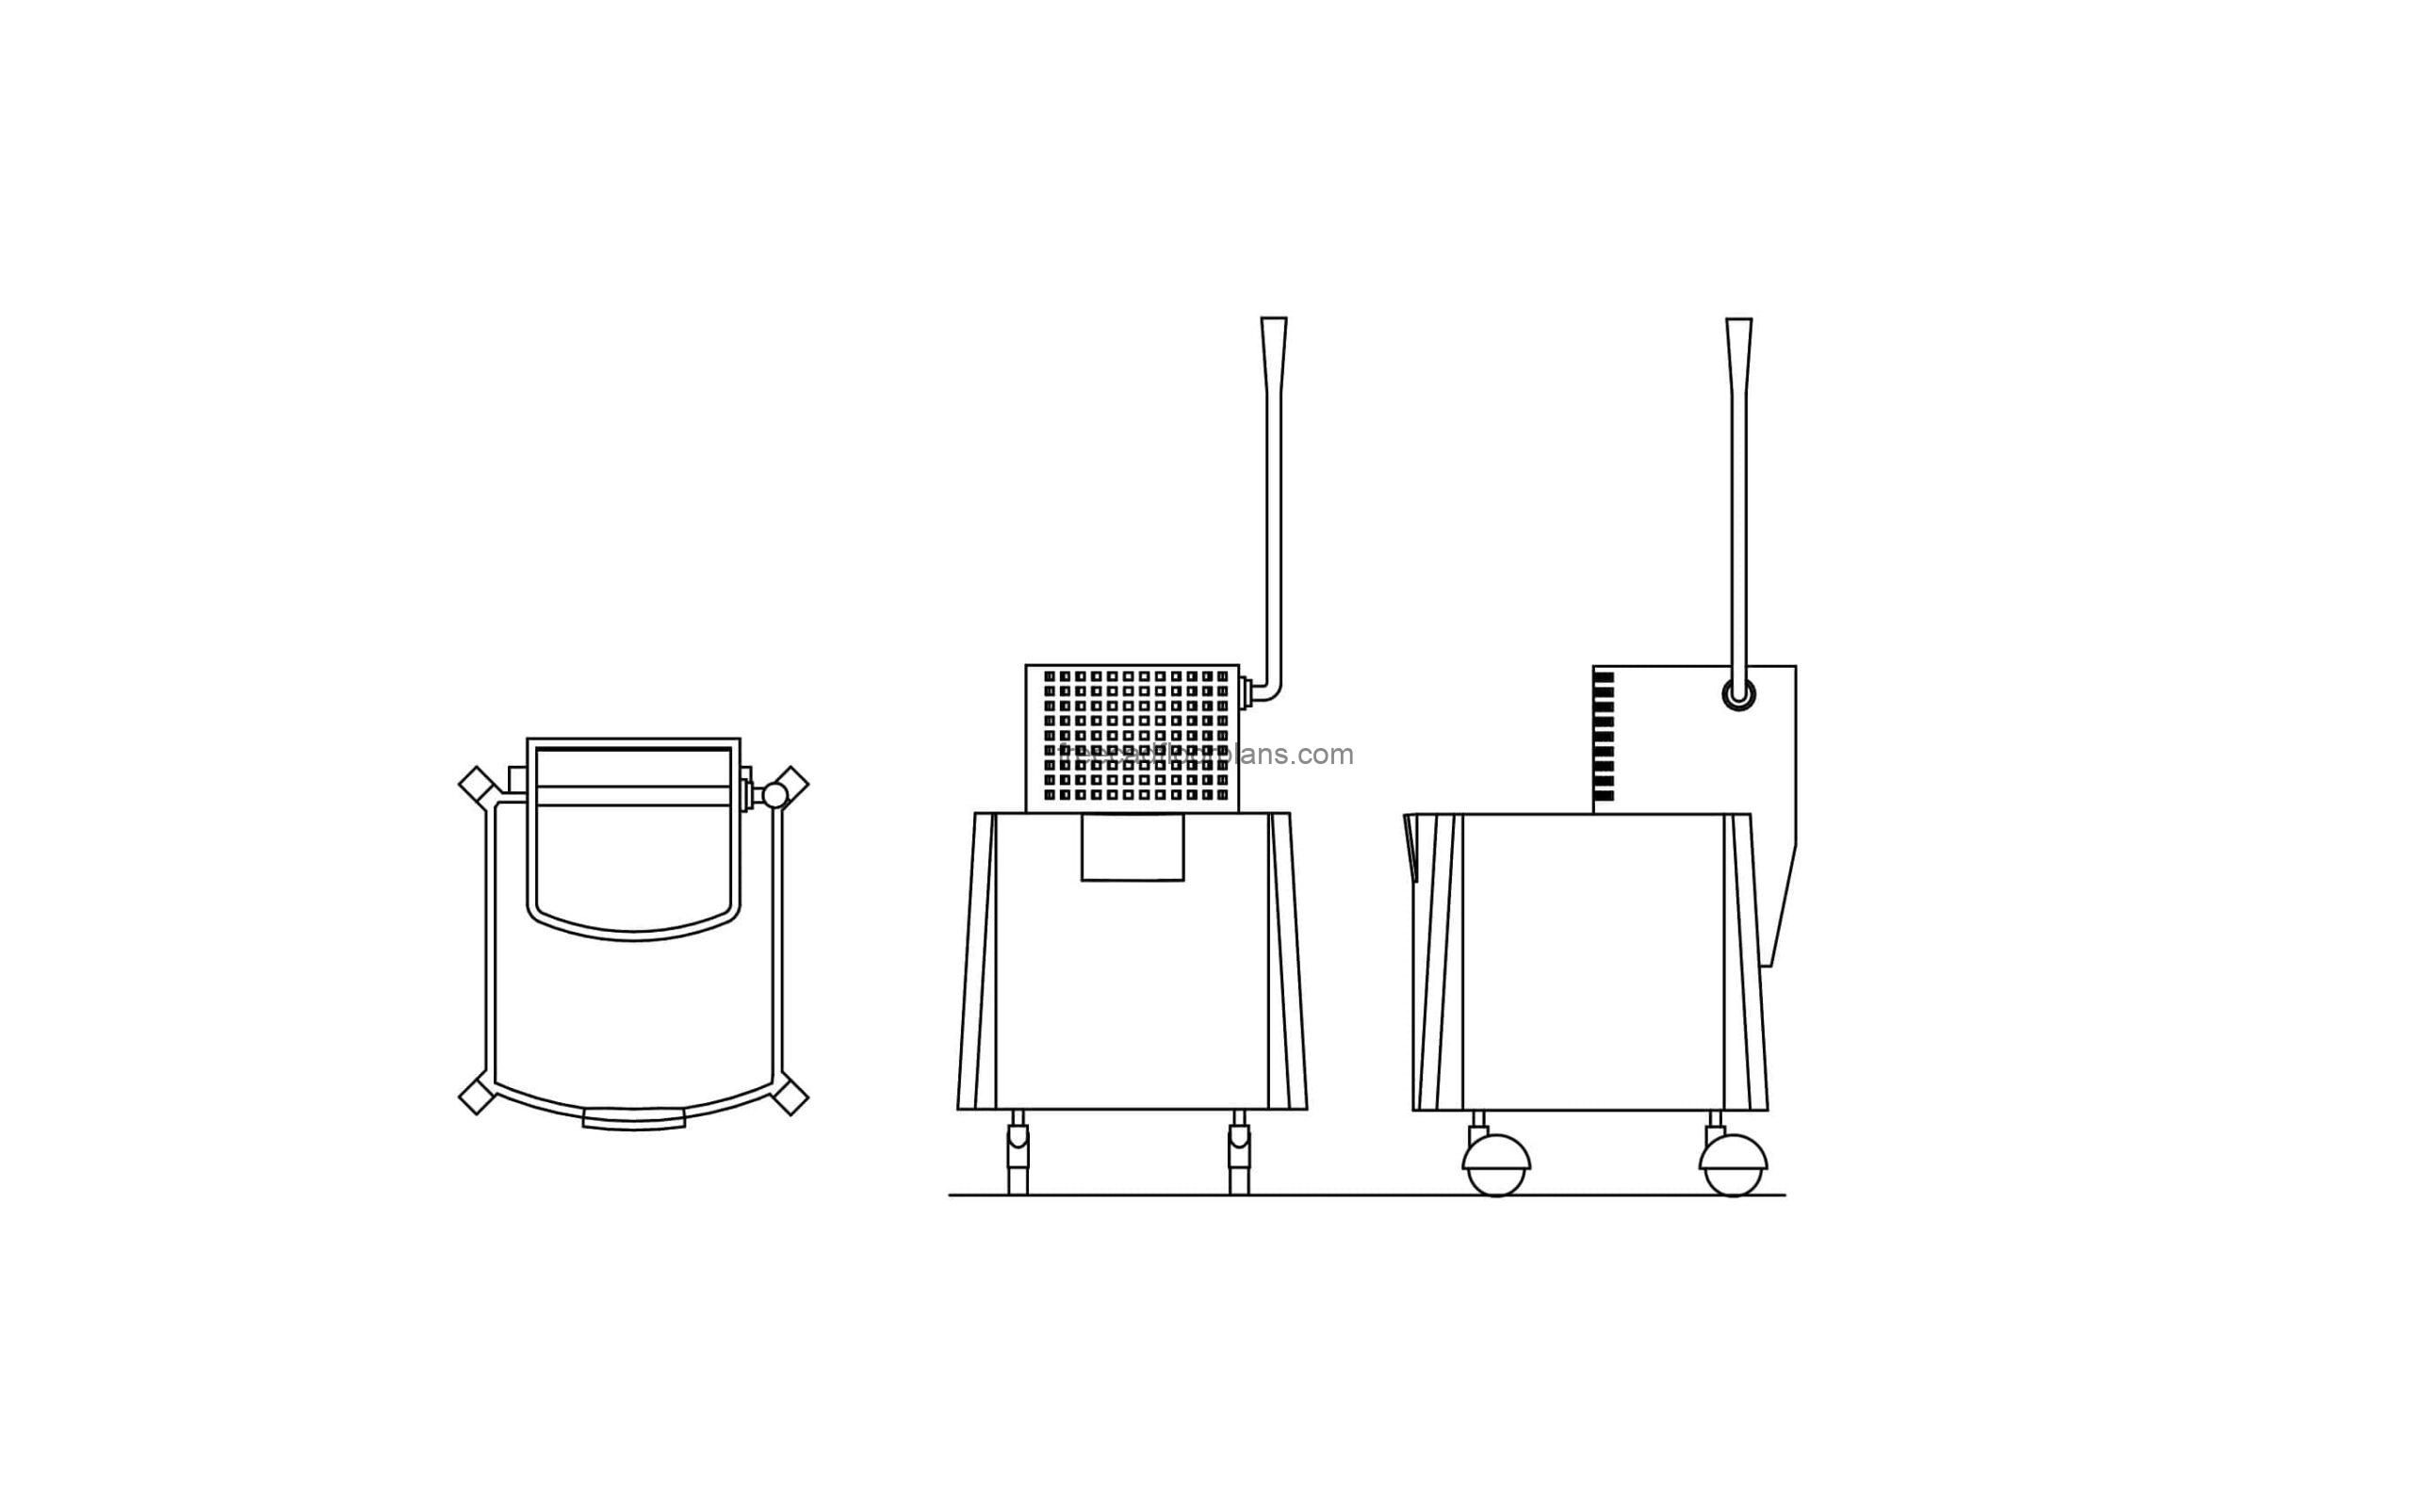 cad block drawing of a plastic mop bucket elevations, plan and side views for free download items for janitor supplie